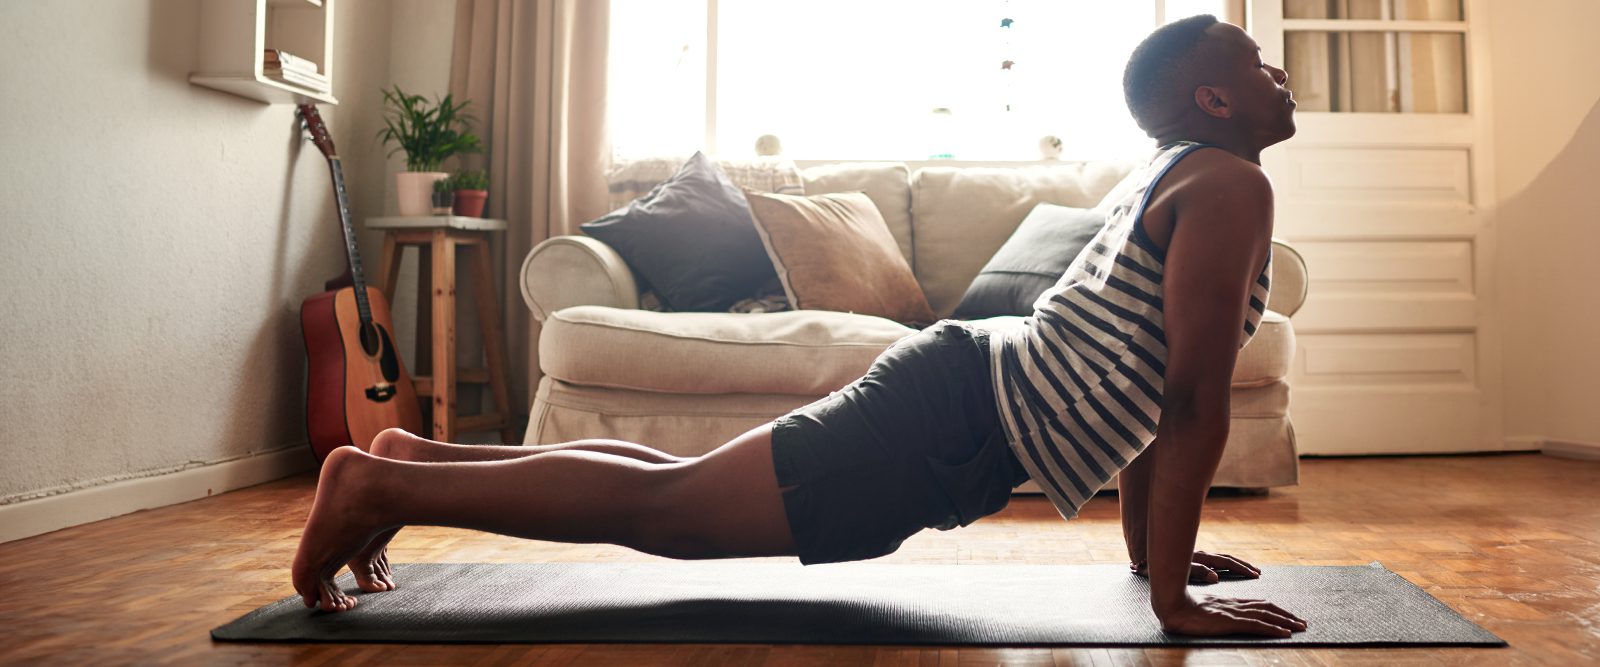 Yoga for Heart Health: 5 Yoga Poses To Improve Your Heart Health.